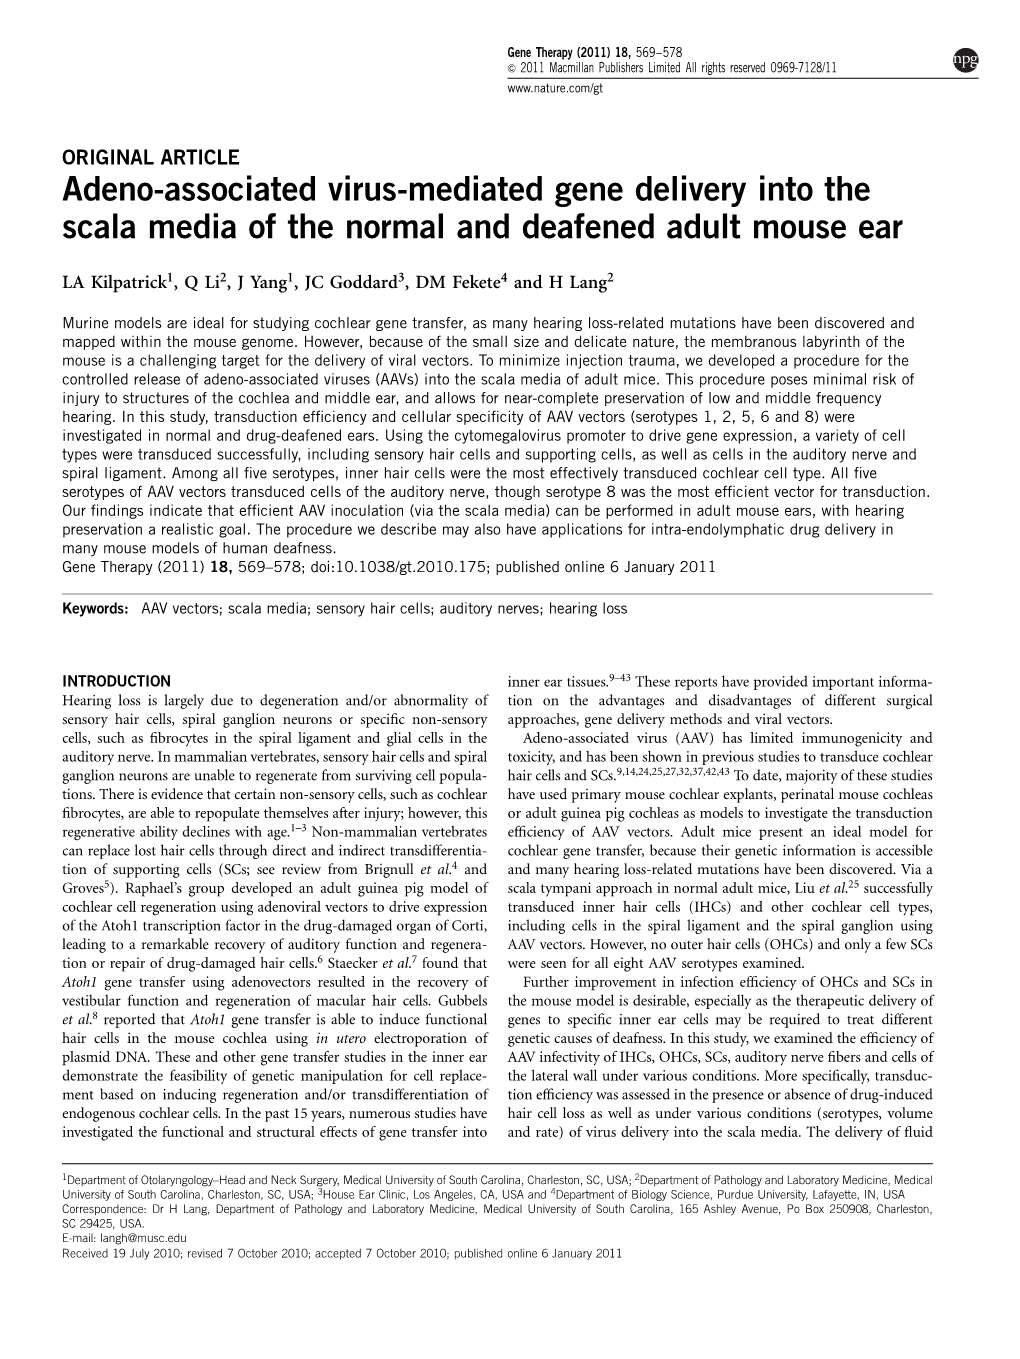 Adeno-Associated Virus-Mediated Gene Delivery Into the Scala Media of the Normal and Deafened Adult Mouse Ear